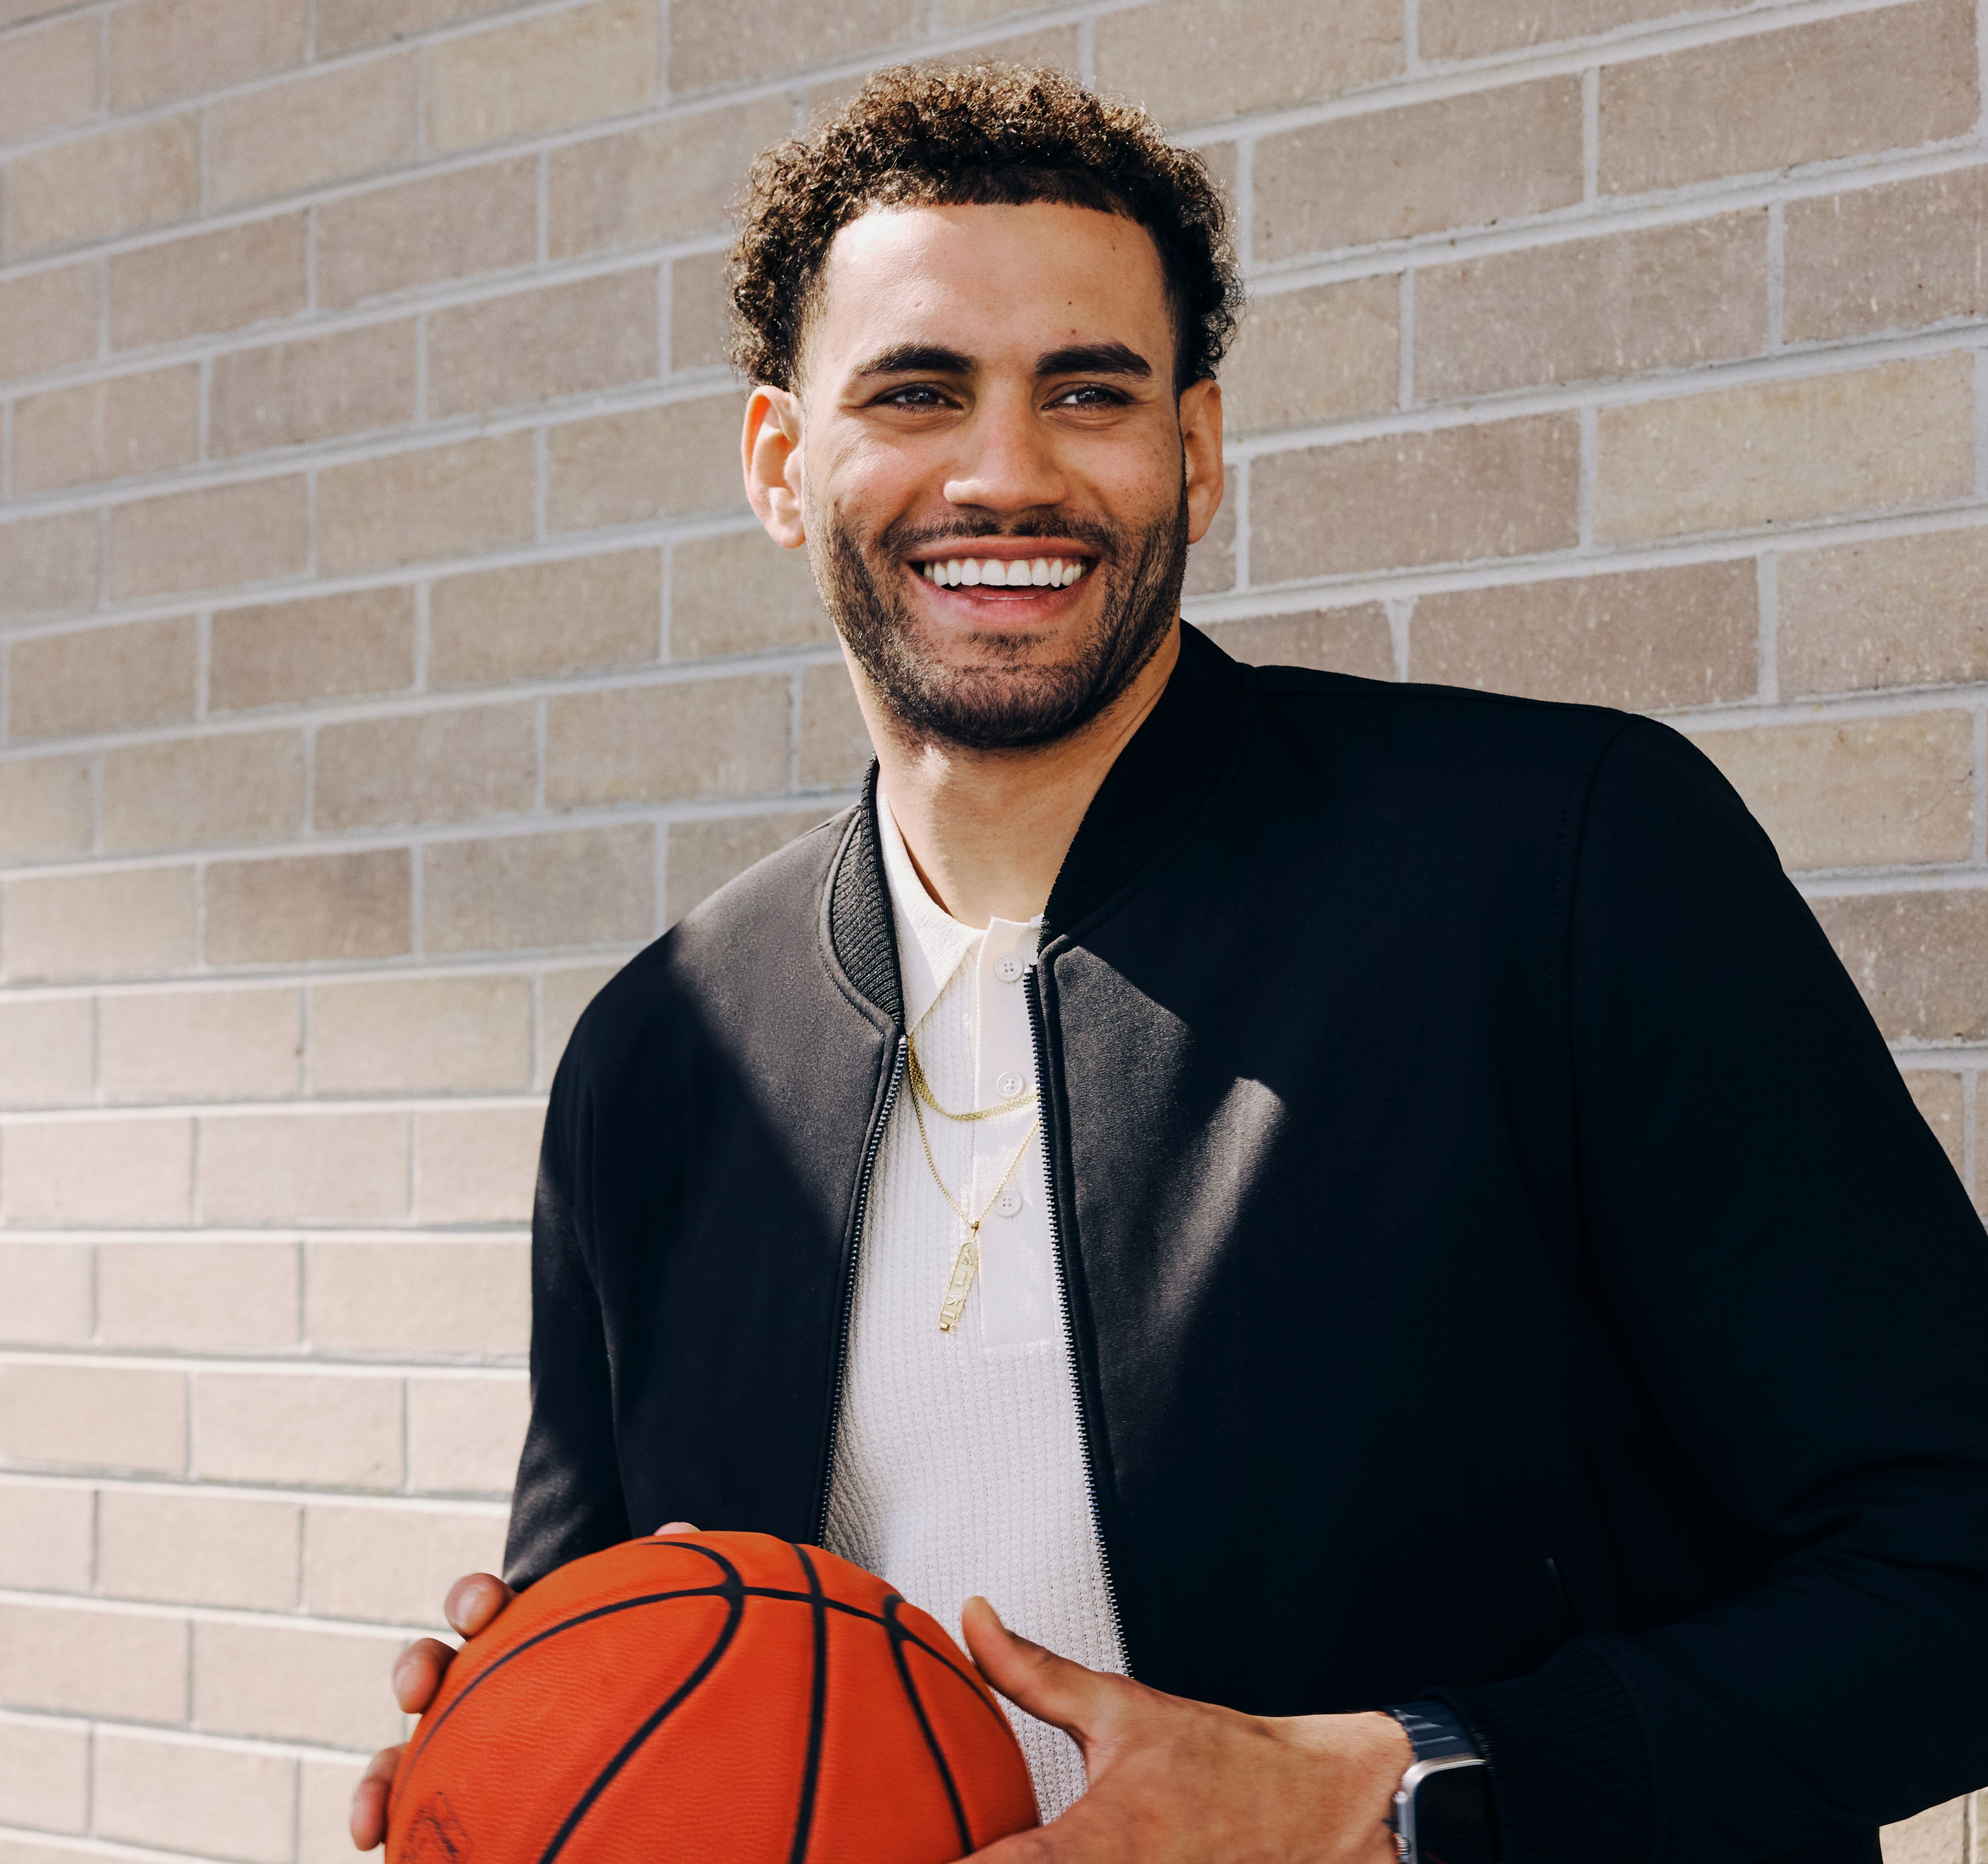 Abdel Nader's photo in full CALIBRE outfit